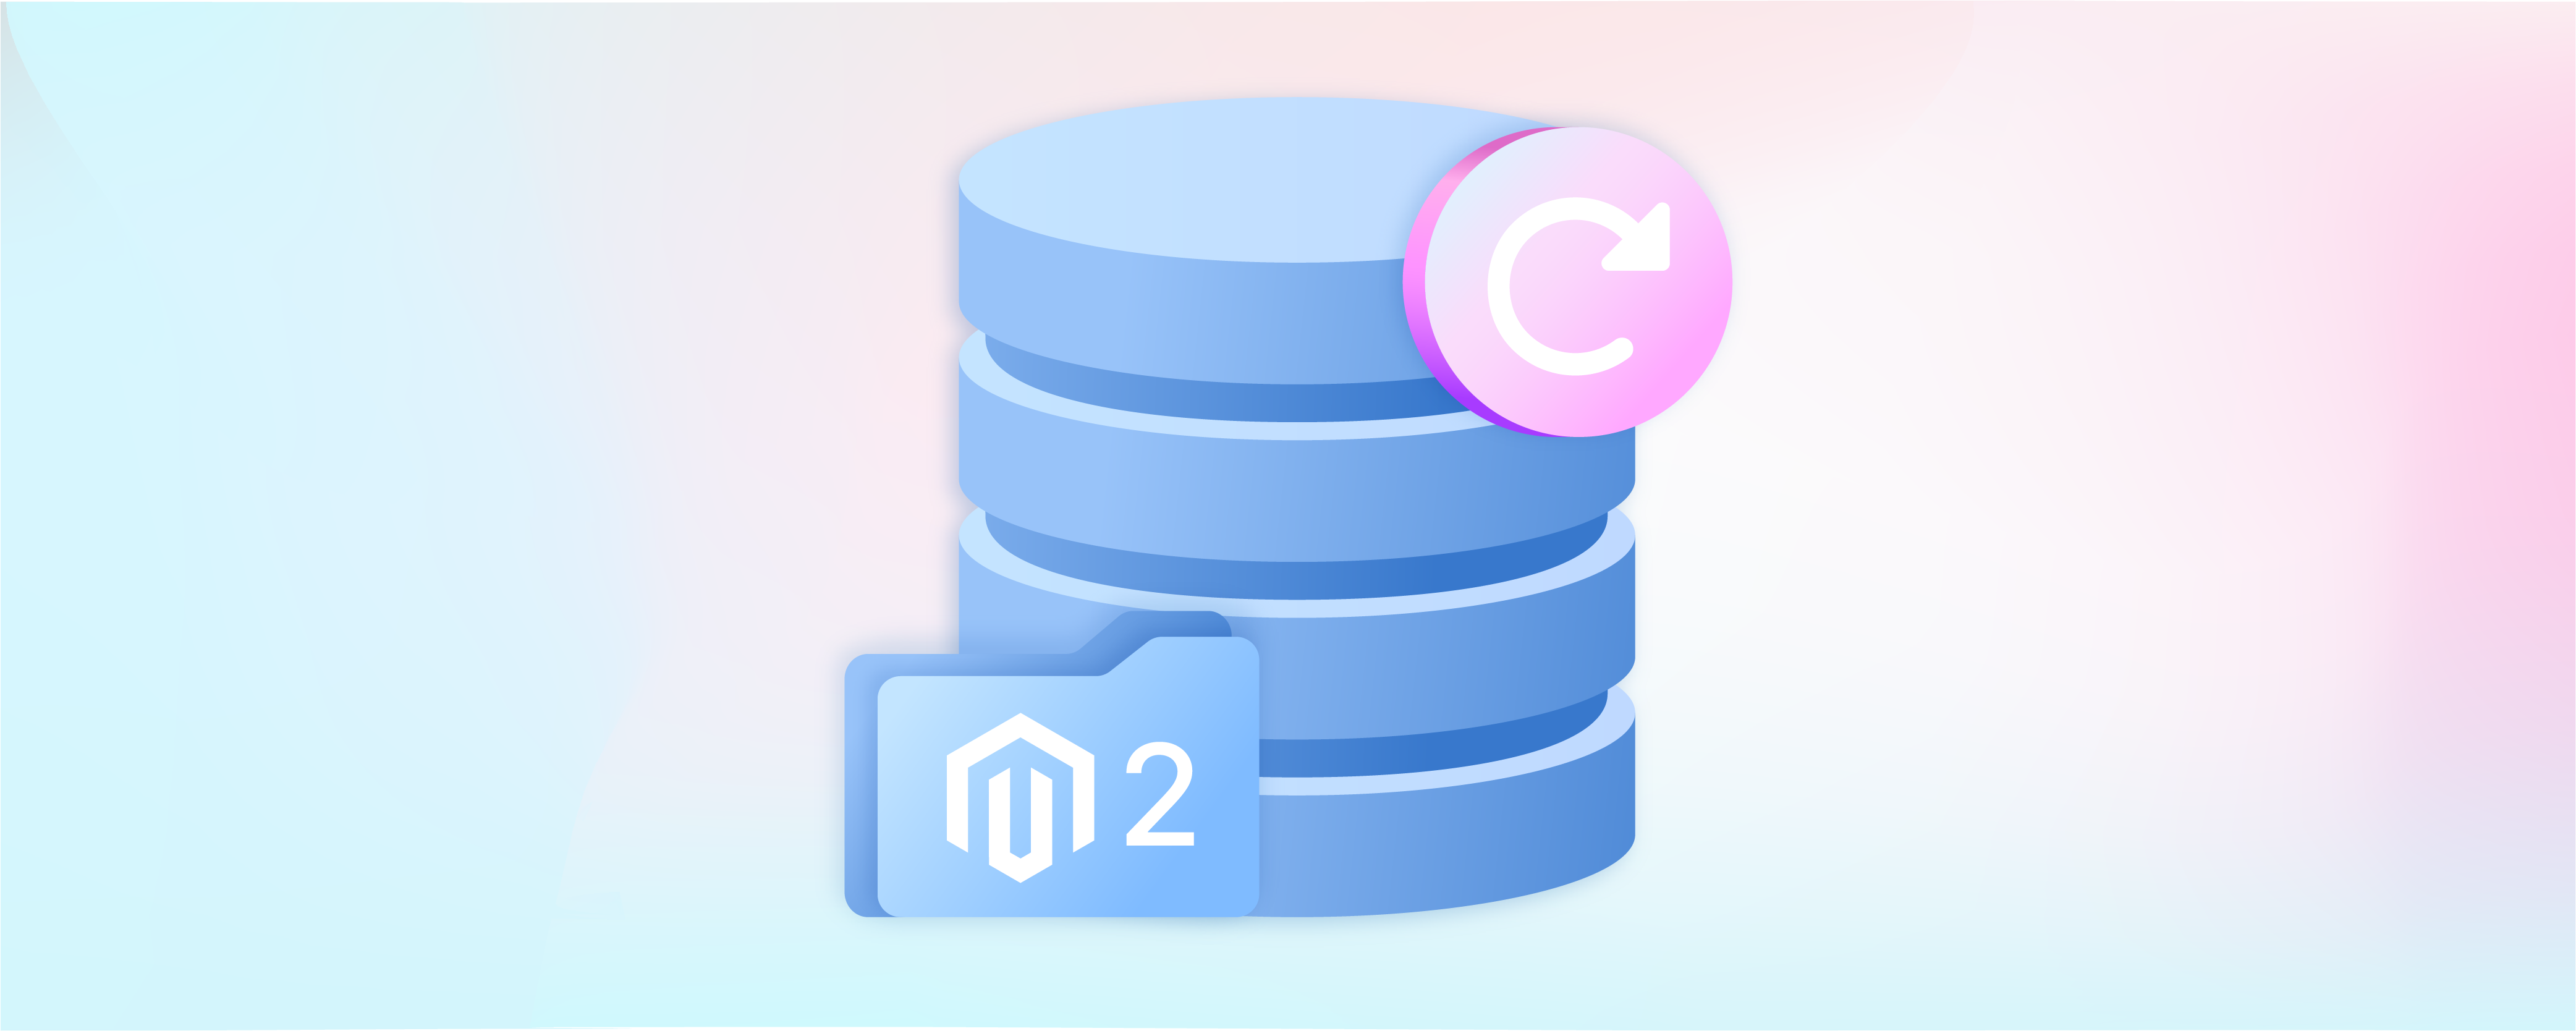 Magento Backup and Restore: How to Backup Magento 2?